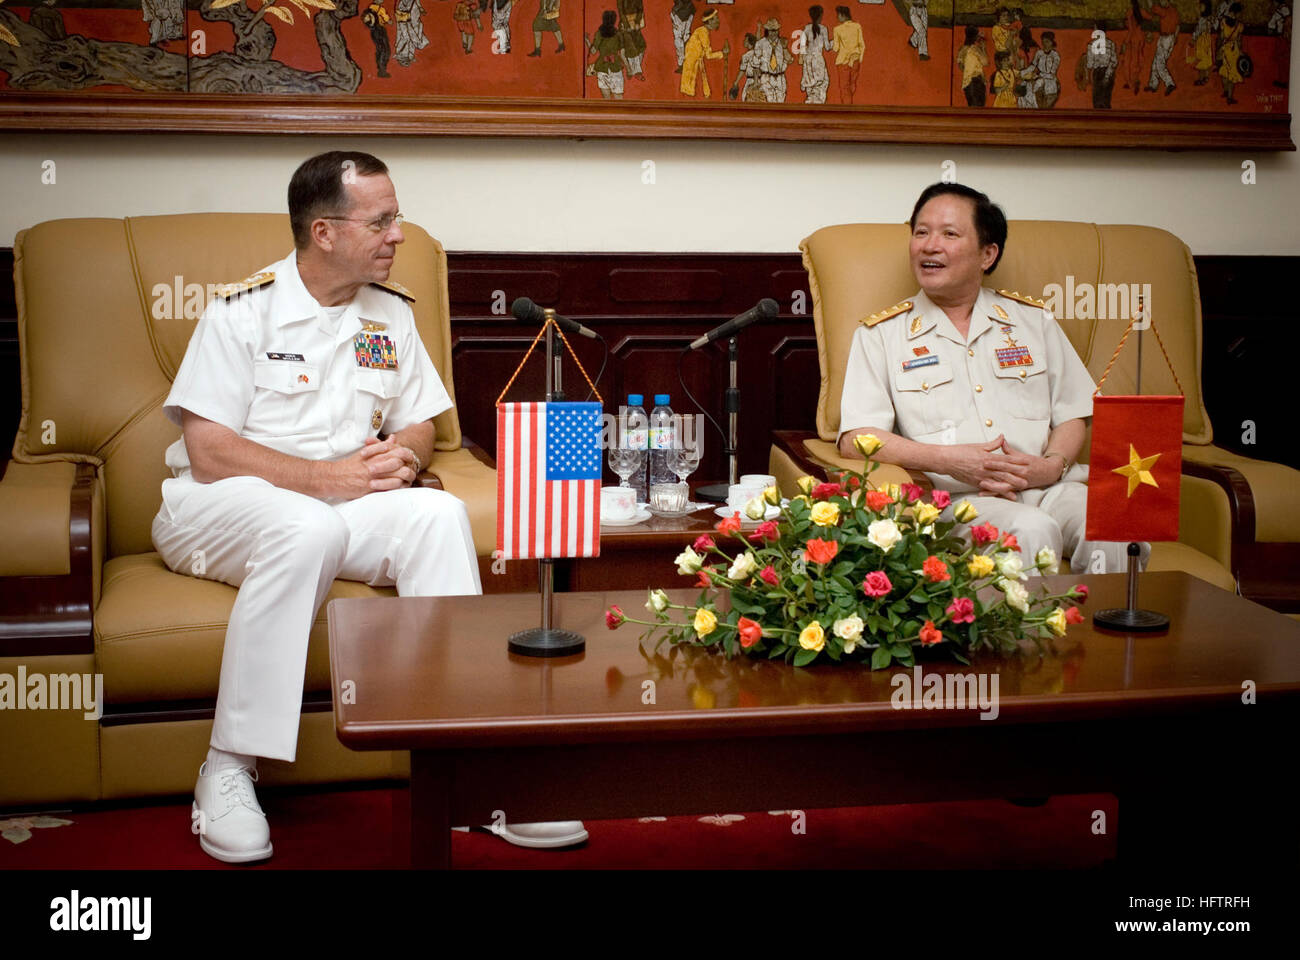 070620-N-0696M-343 HANOI, Vietnam (June 20, 2007) - Chief of Naval Operations (CNO) Adm. Mike Mullen visits with Vietnamese Deputy Minister of National Defense, Senior Lt. Gen. Nguyen Huy Hieu during an office call. Mullen is on a seven-day trip to Japan and Vietnam to visit with foreign leaders and with Sailors stationed in the region. U.S. Navy photo by Mass Communication Specialist 1st Class Chad J. McNeeley (RELEASED) US Navy 070620-N-0696M-343 Chief of Naval Operations (CNO) Adm. Mike Mullen visits with Vietnamese Deputy Minister of National Defense, Senior Lt. Gen. Nguyen Huy Hieu during Stock Photo